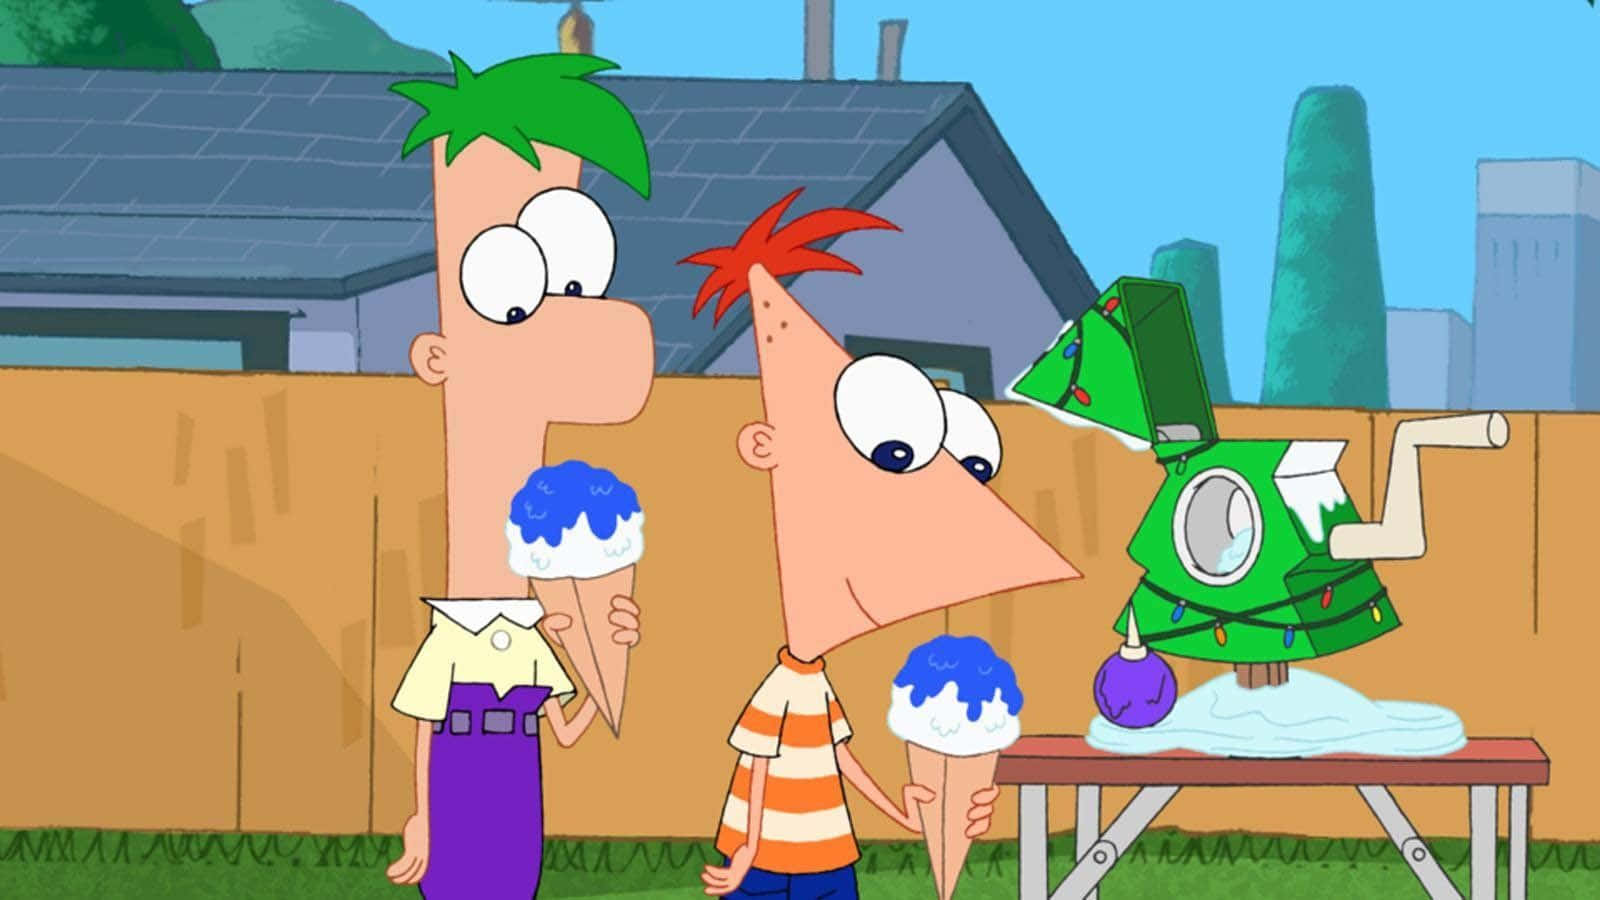 Phineas and Ferb enjoying their summer adventures